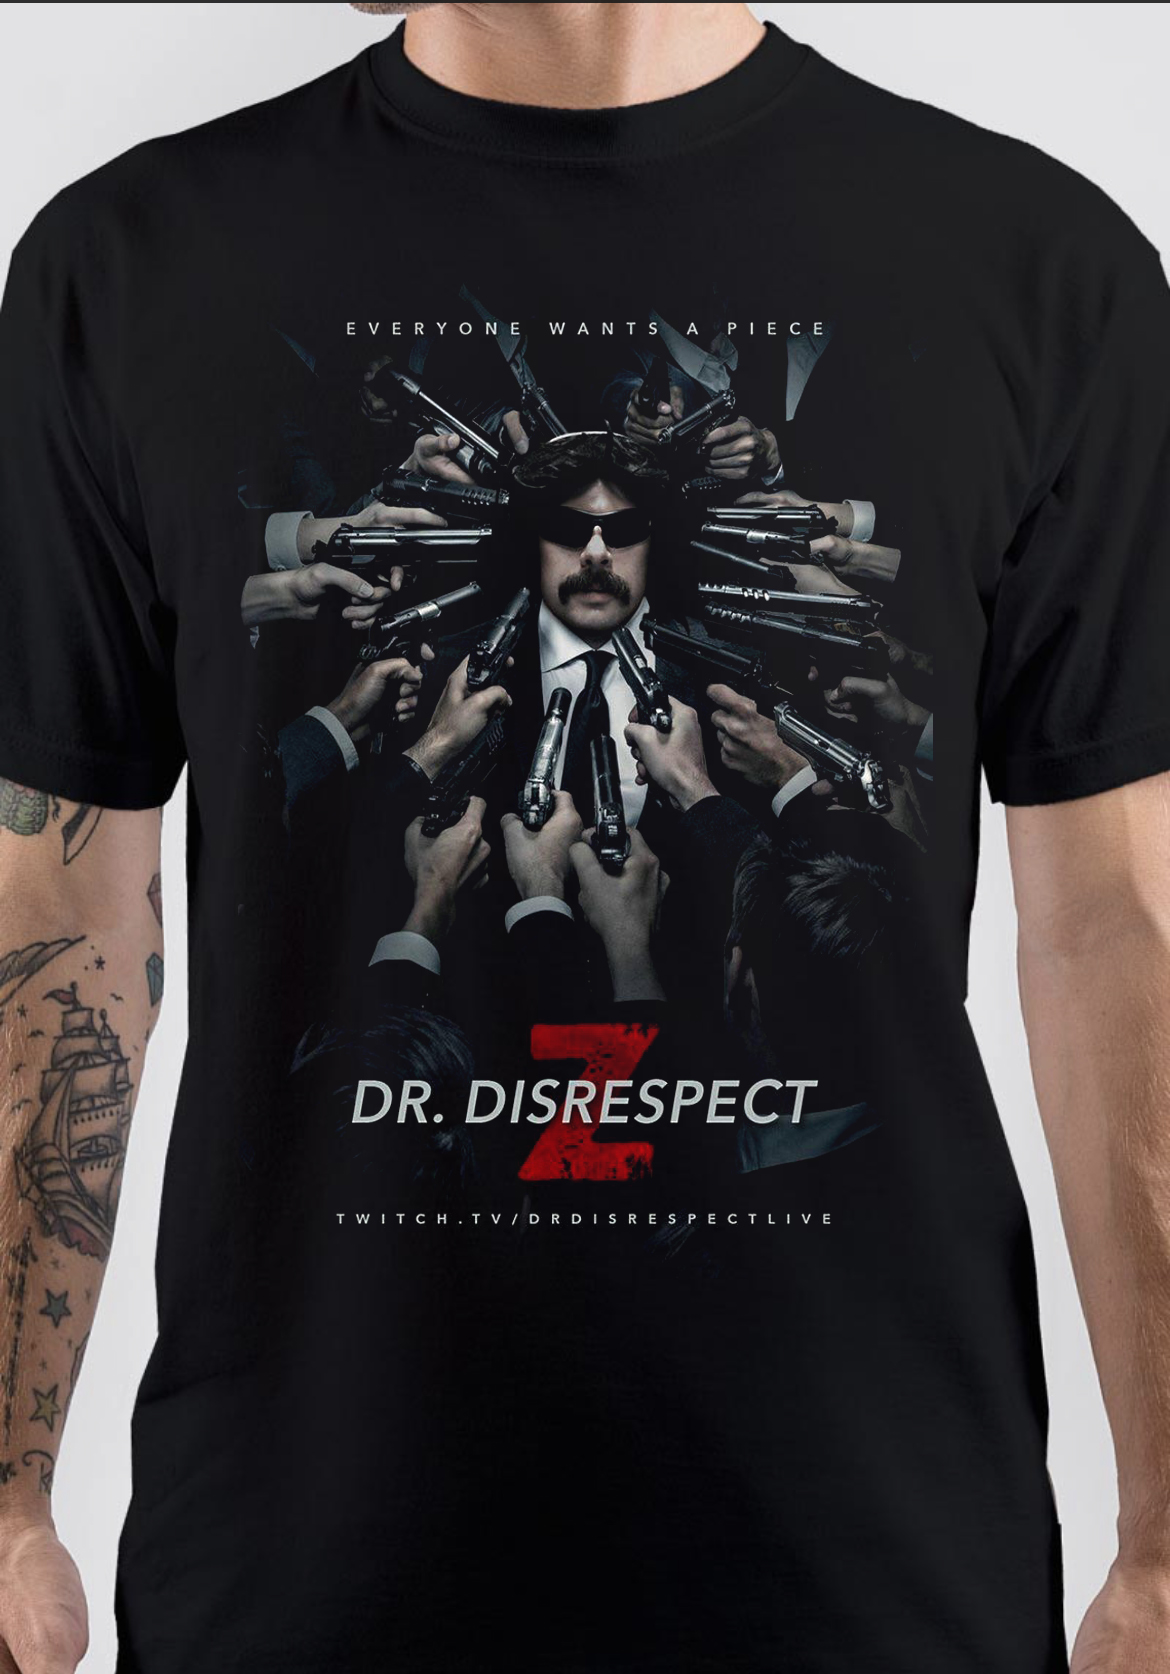 Dr DisRespect T-Shirt And Merchandise